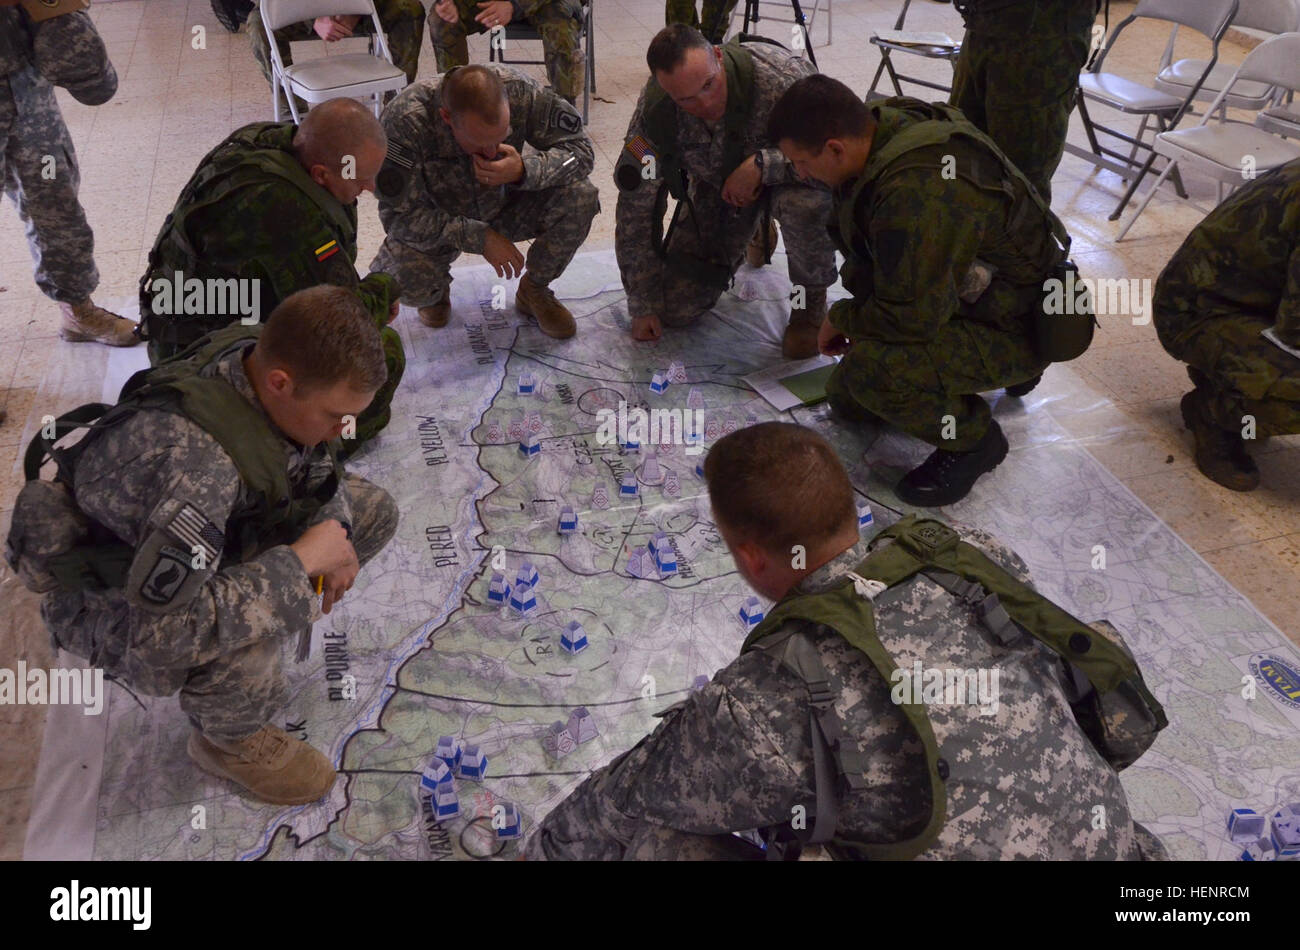 U.S. Soldiers and Lithuanian soldiers explain their soldiers' locations on a combined arms rehearsal map during training exercise Saber Junction 2014 at the Joint Multinational Readiness Center in Hohenfels, Germany, Sept. 4, 2014. Saber Junction 2014 prepares U.S., NATO allies, and European security partners to conduct unified land operations through the simultaneous combination of offensive, defensive, and stability operations appropriate to the mission and the environment. More information about Saber Junction 2014 can be found at http://www.eur.army.mil/SaberJunction/. (U.S. Army photo by  Stock Photo